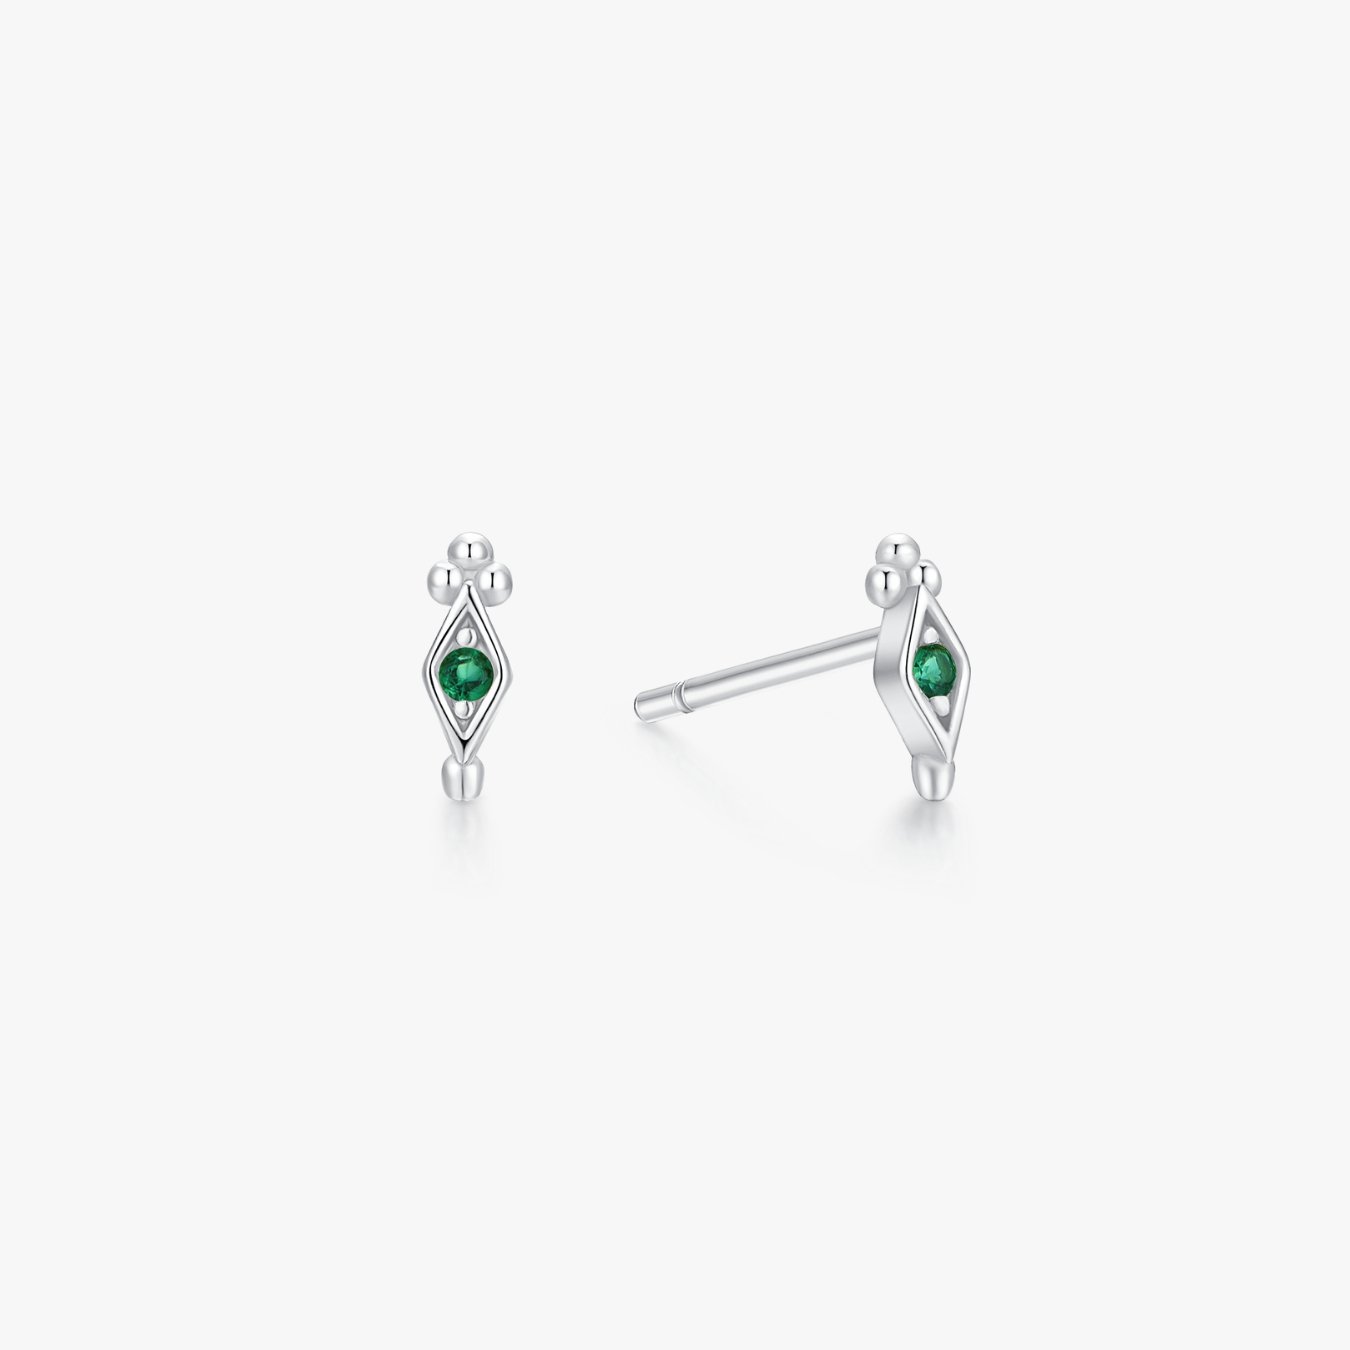 Green Gem Freya Studs in Silver - Flaire & Co.